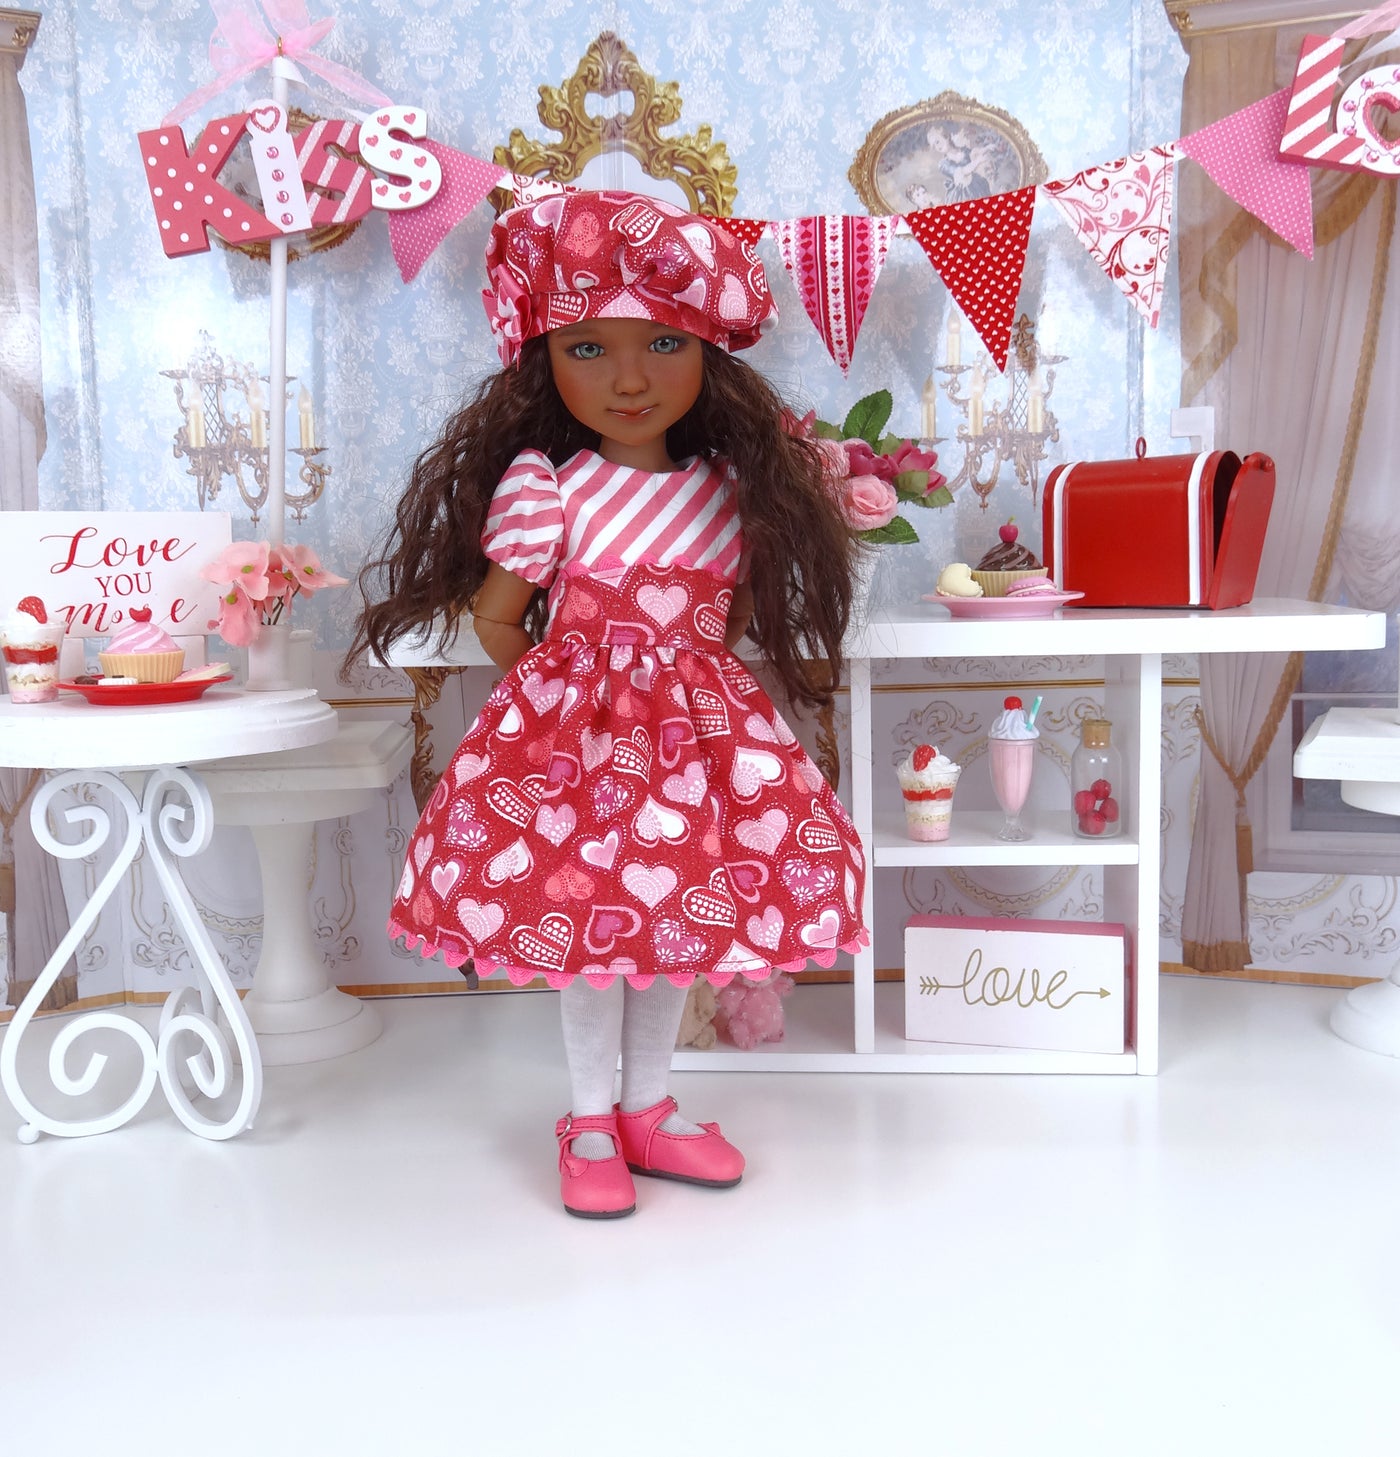 Fluttering Hearts - dress ensemble with shoes for Ruby Red Fashion Friends doll